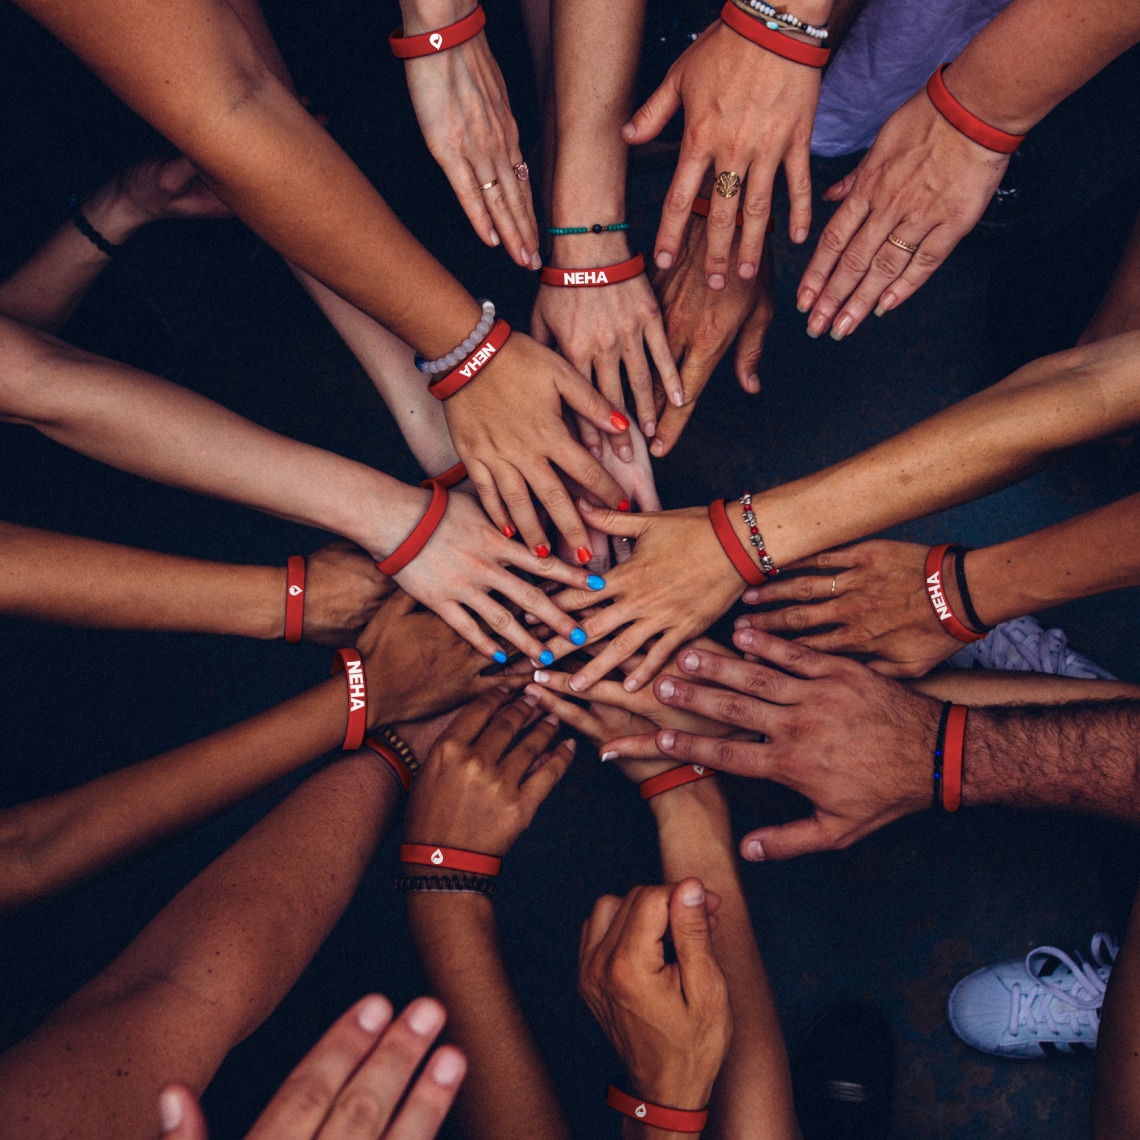 a group of people wearing red bracelets with the NEHA logo, putting their hands together